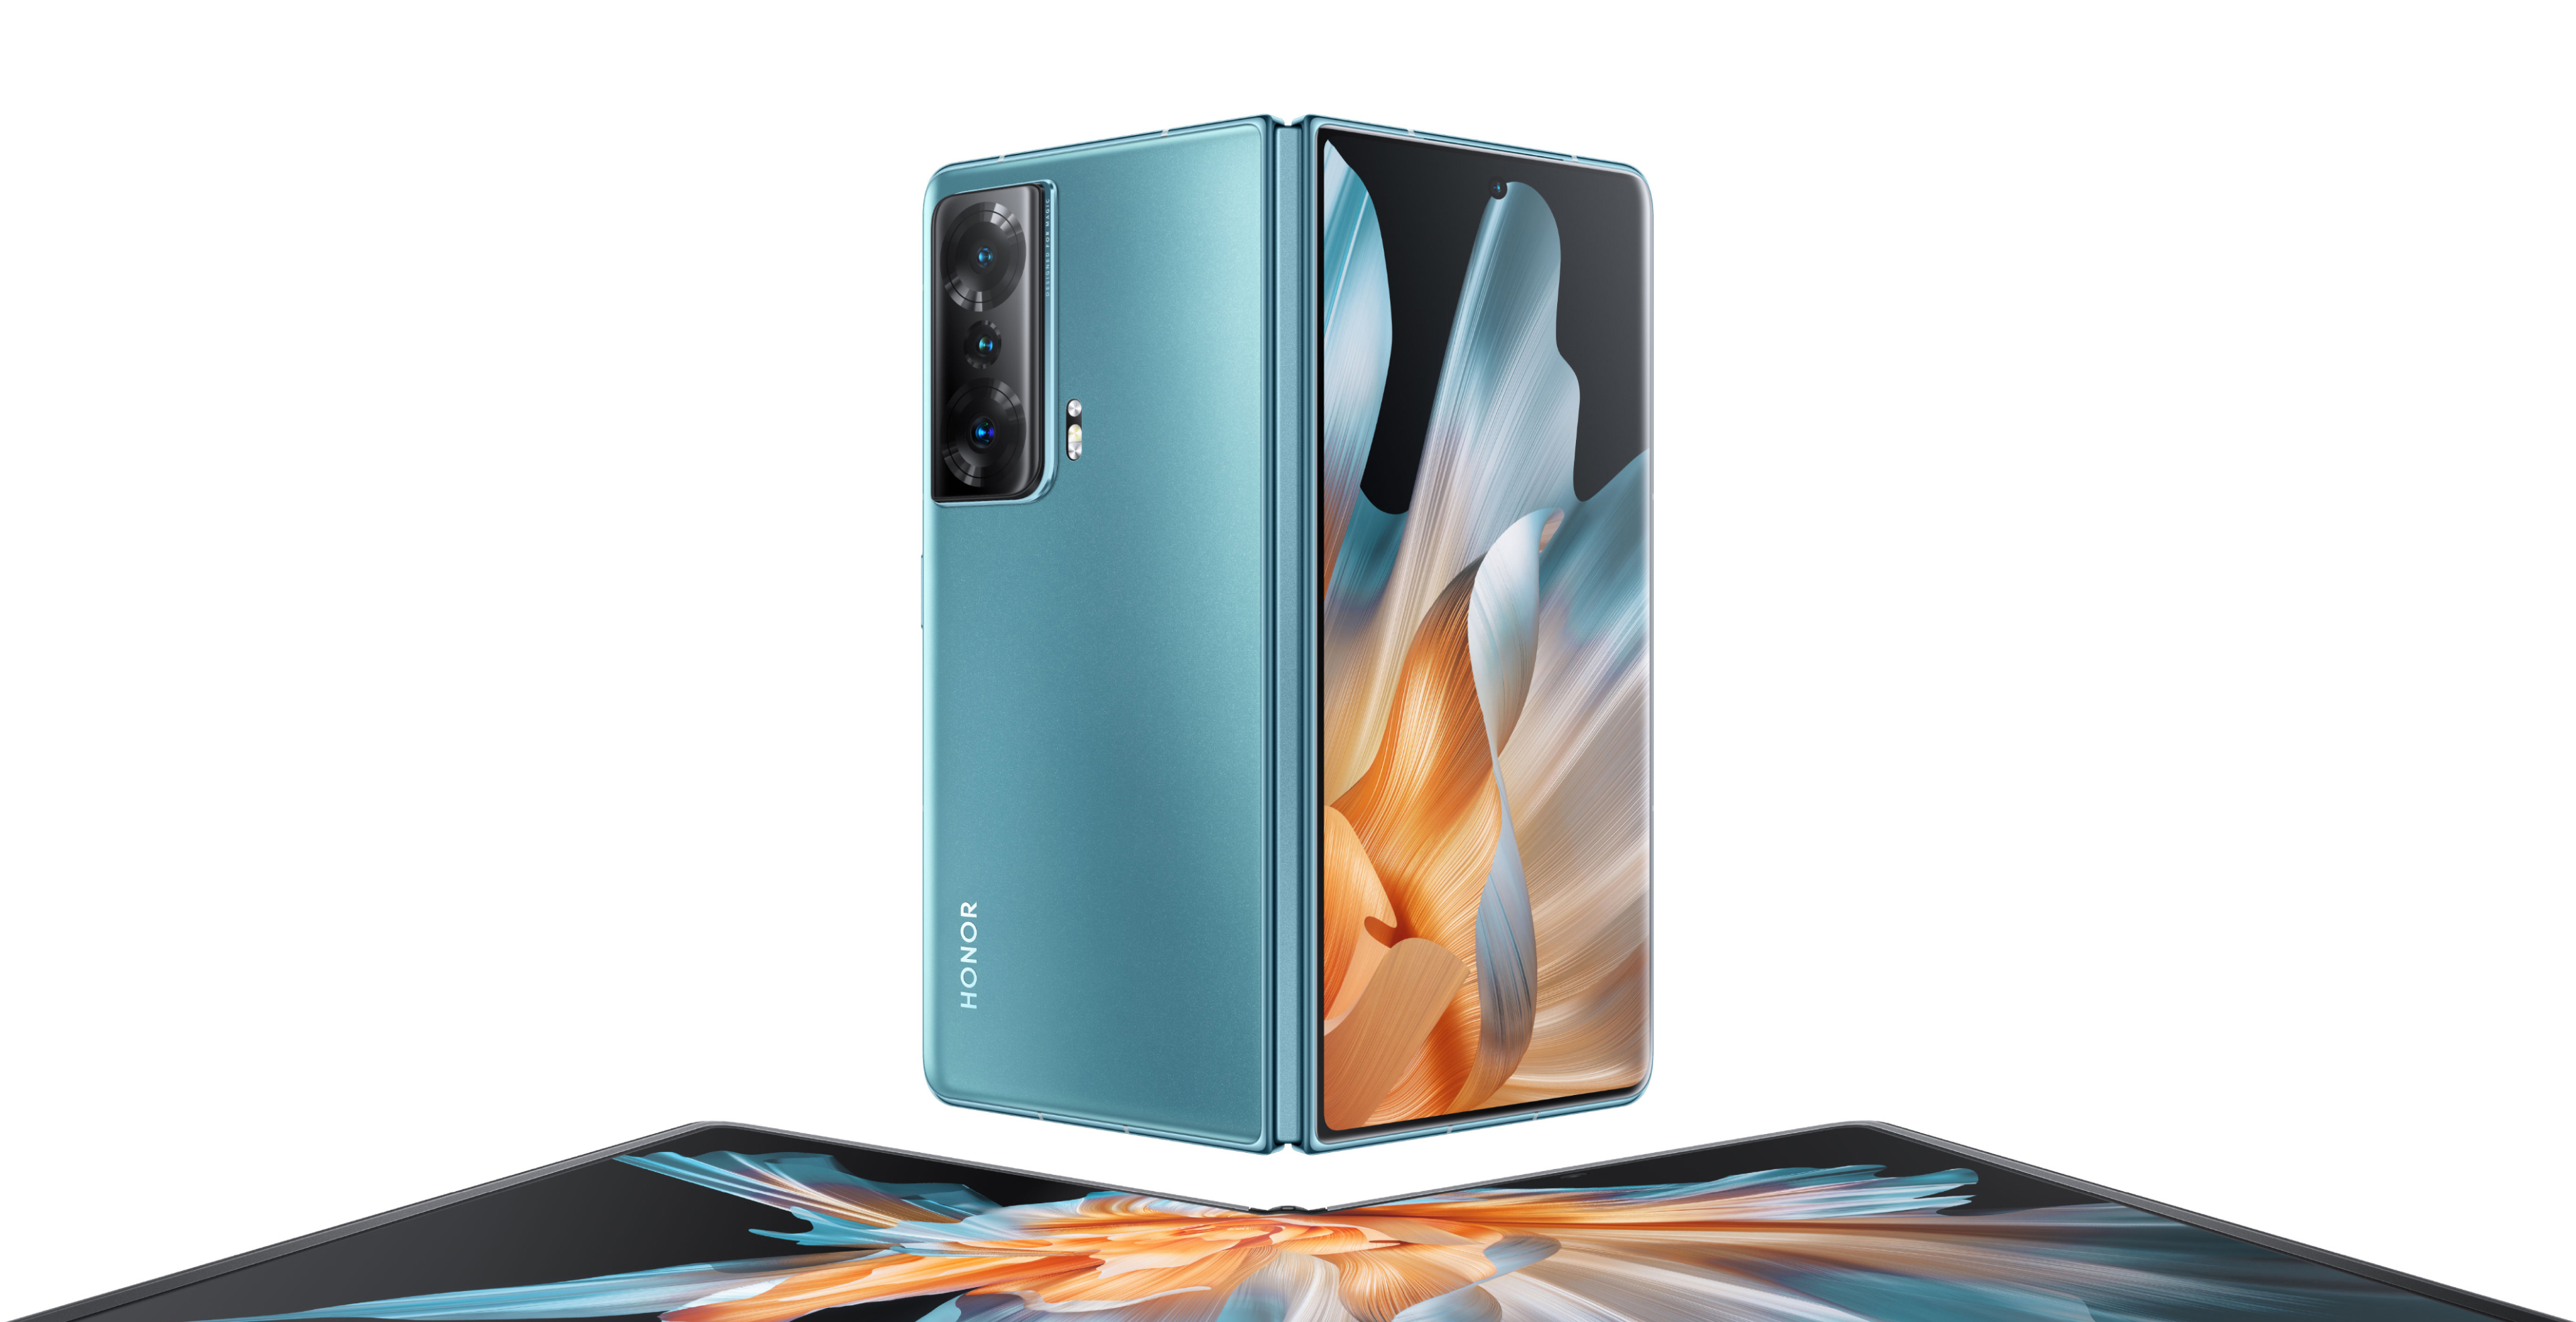 When and how much will the Honor Magic Vs with dual OLED screens, Snapdragon 8+ Gen 1 chip and 5000mAh battery be available in Europe